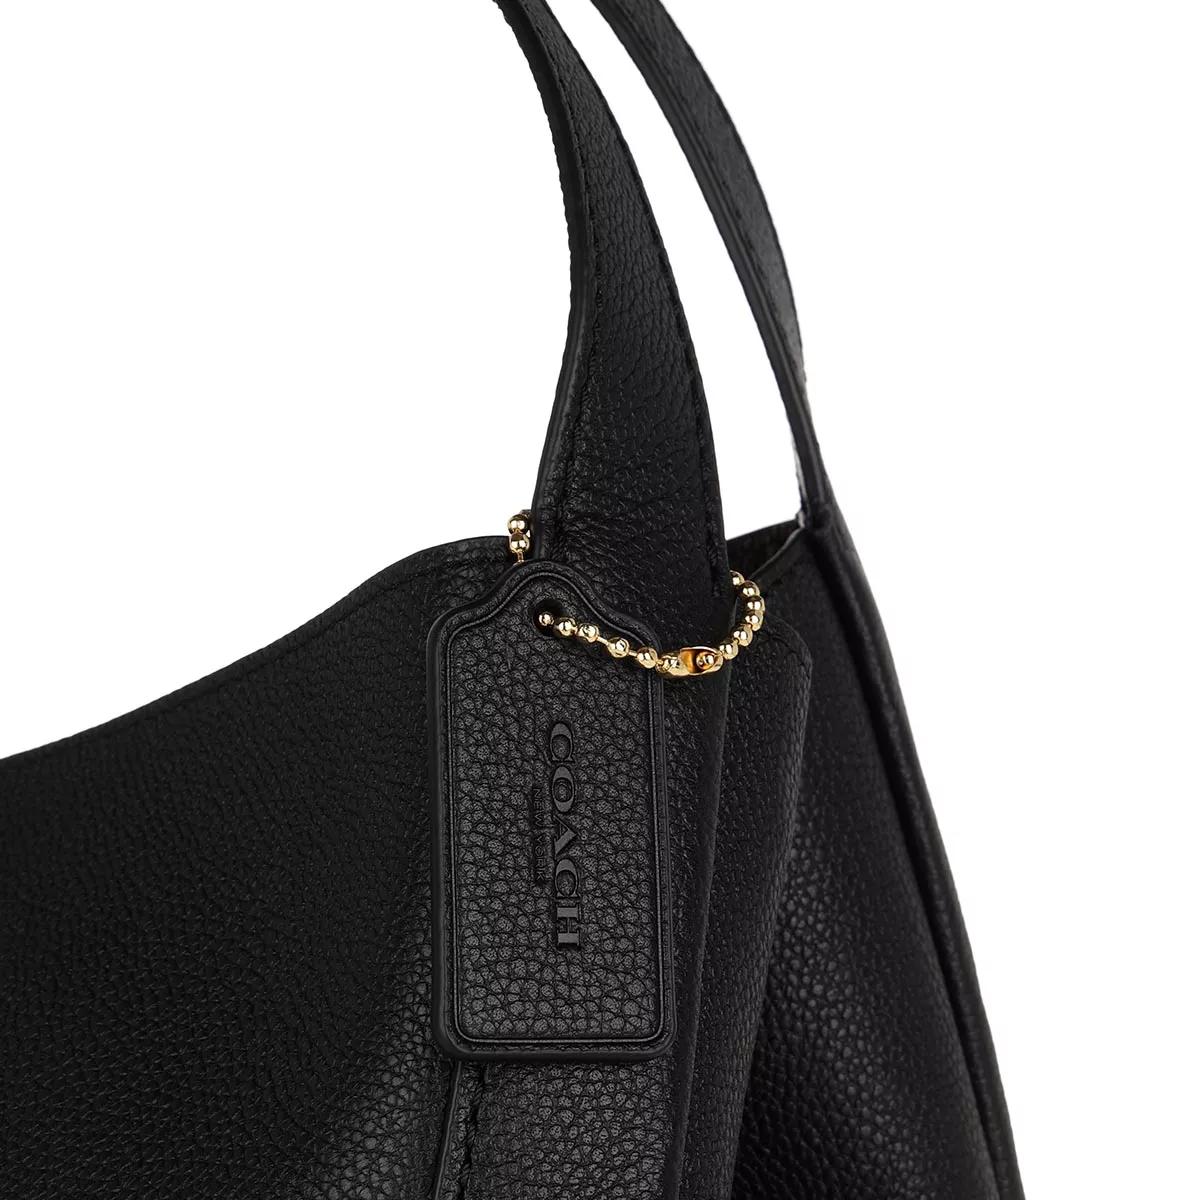 .com: COACH Women's Polished Pebble Leather Hadley Hobo, Black/Gold,  One Size : Clothing, Shoes & Jewelry